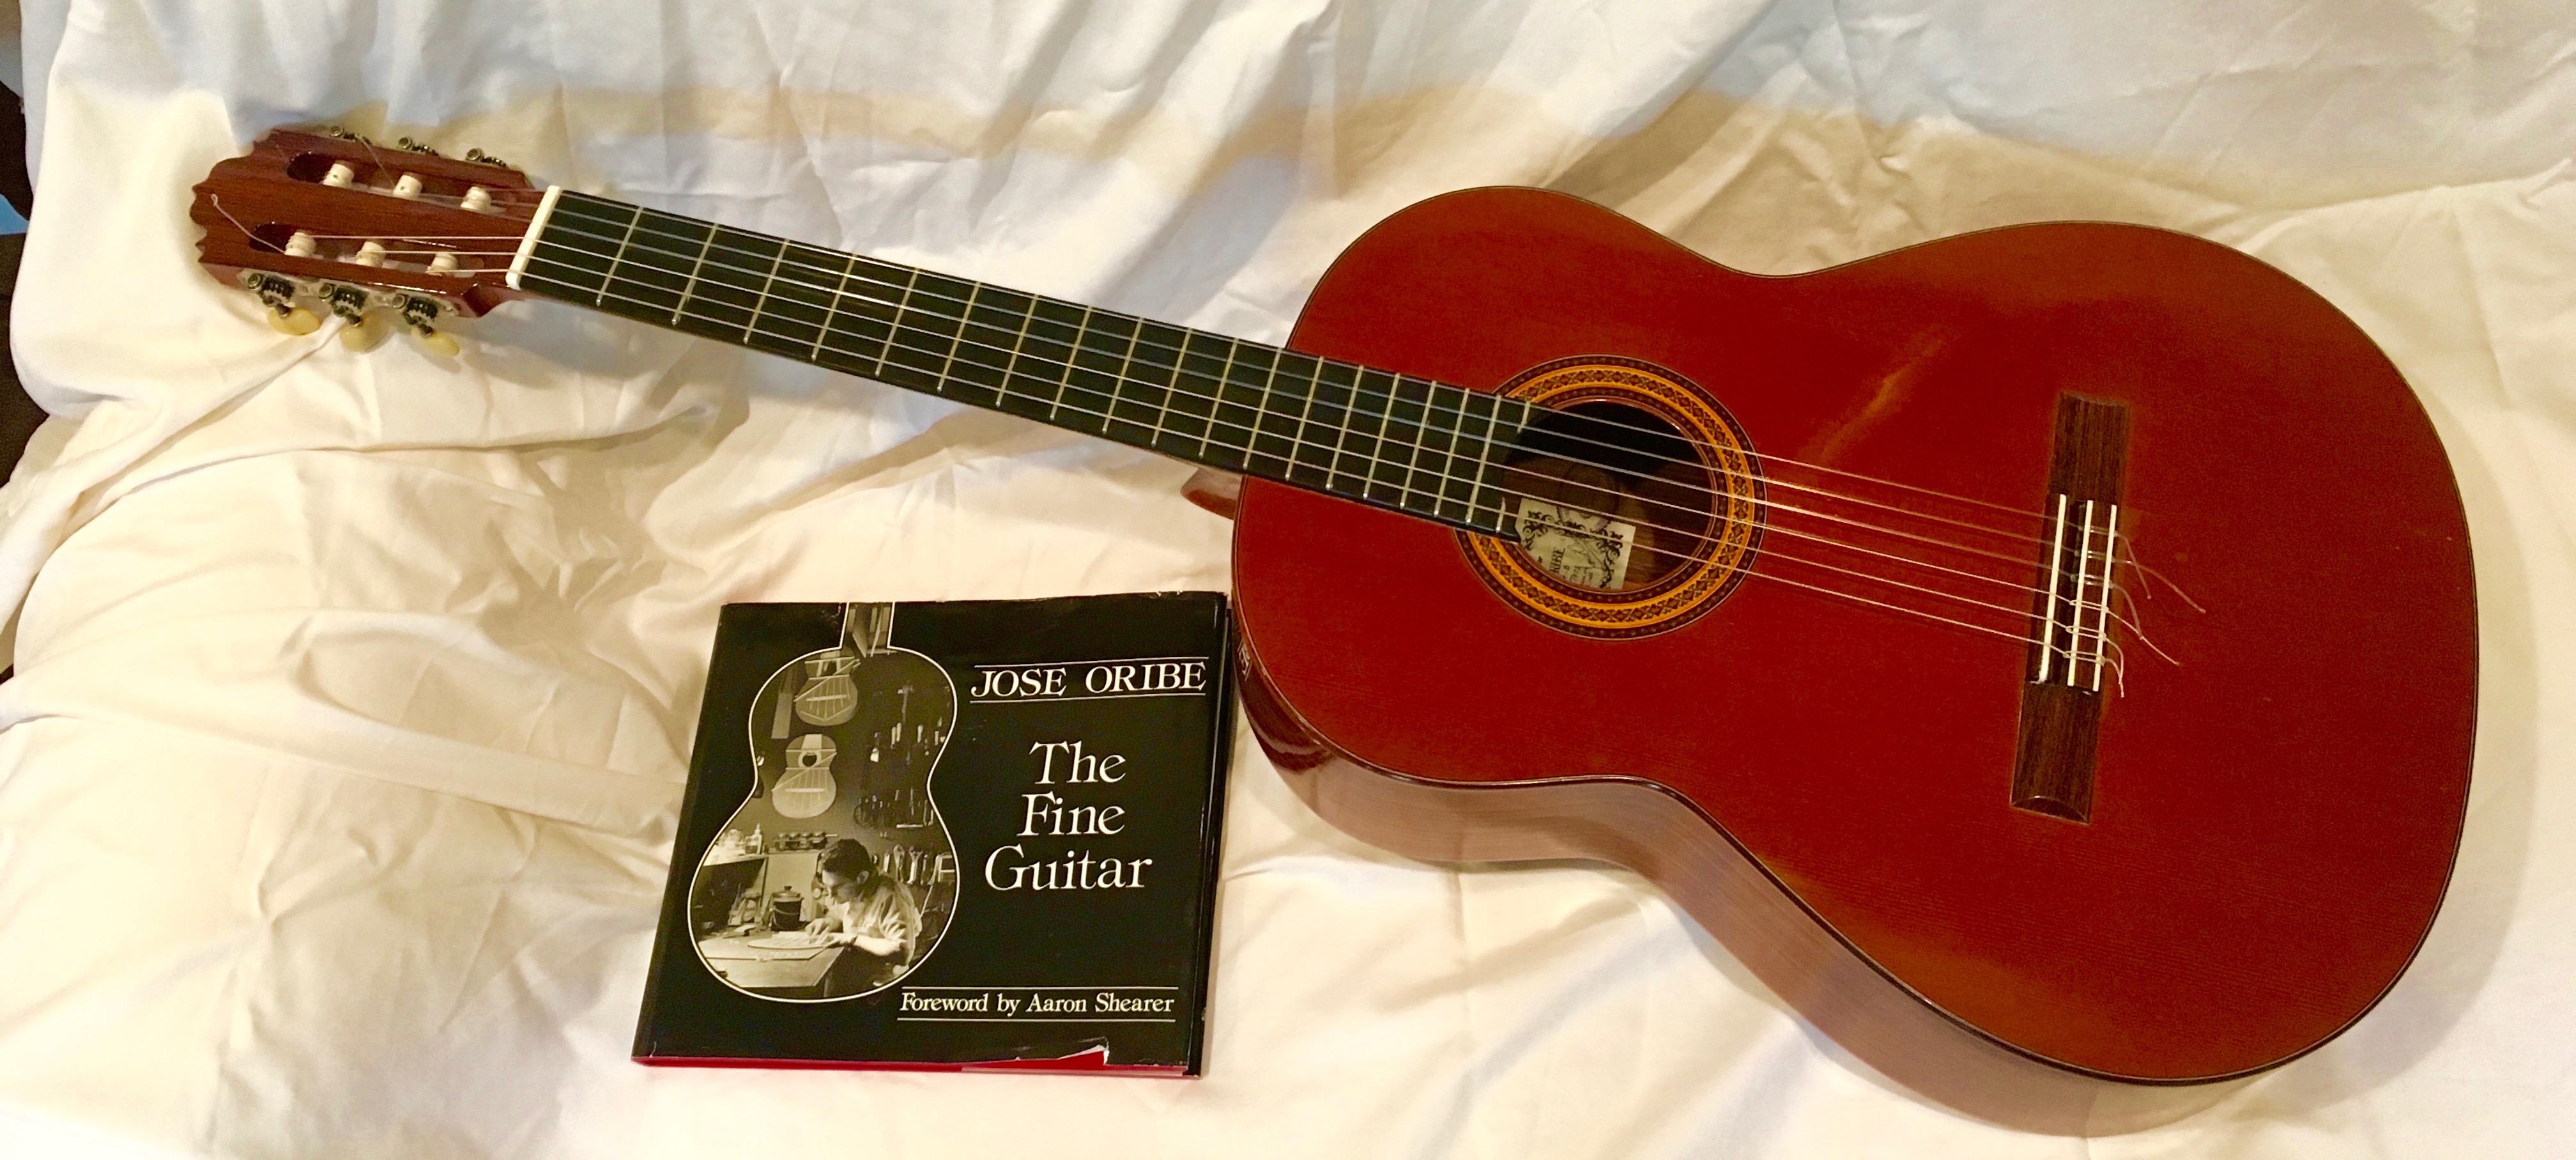 *Oribe guitar, case and book (1)